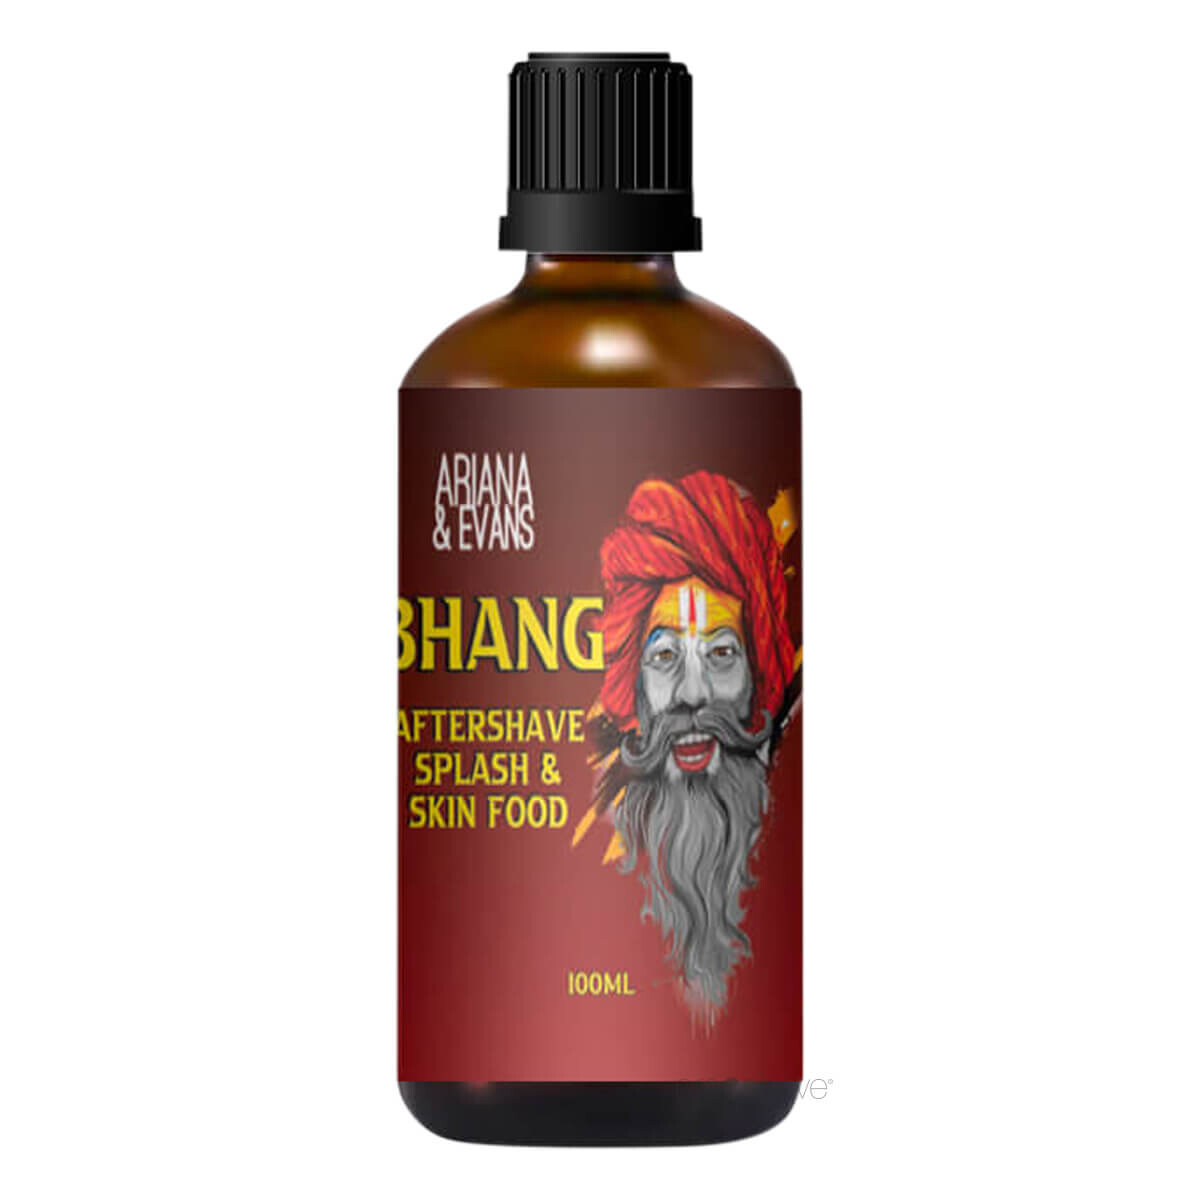 Ariana & Evans Aftershave, Bhang, 100 ml.